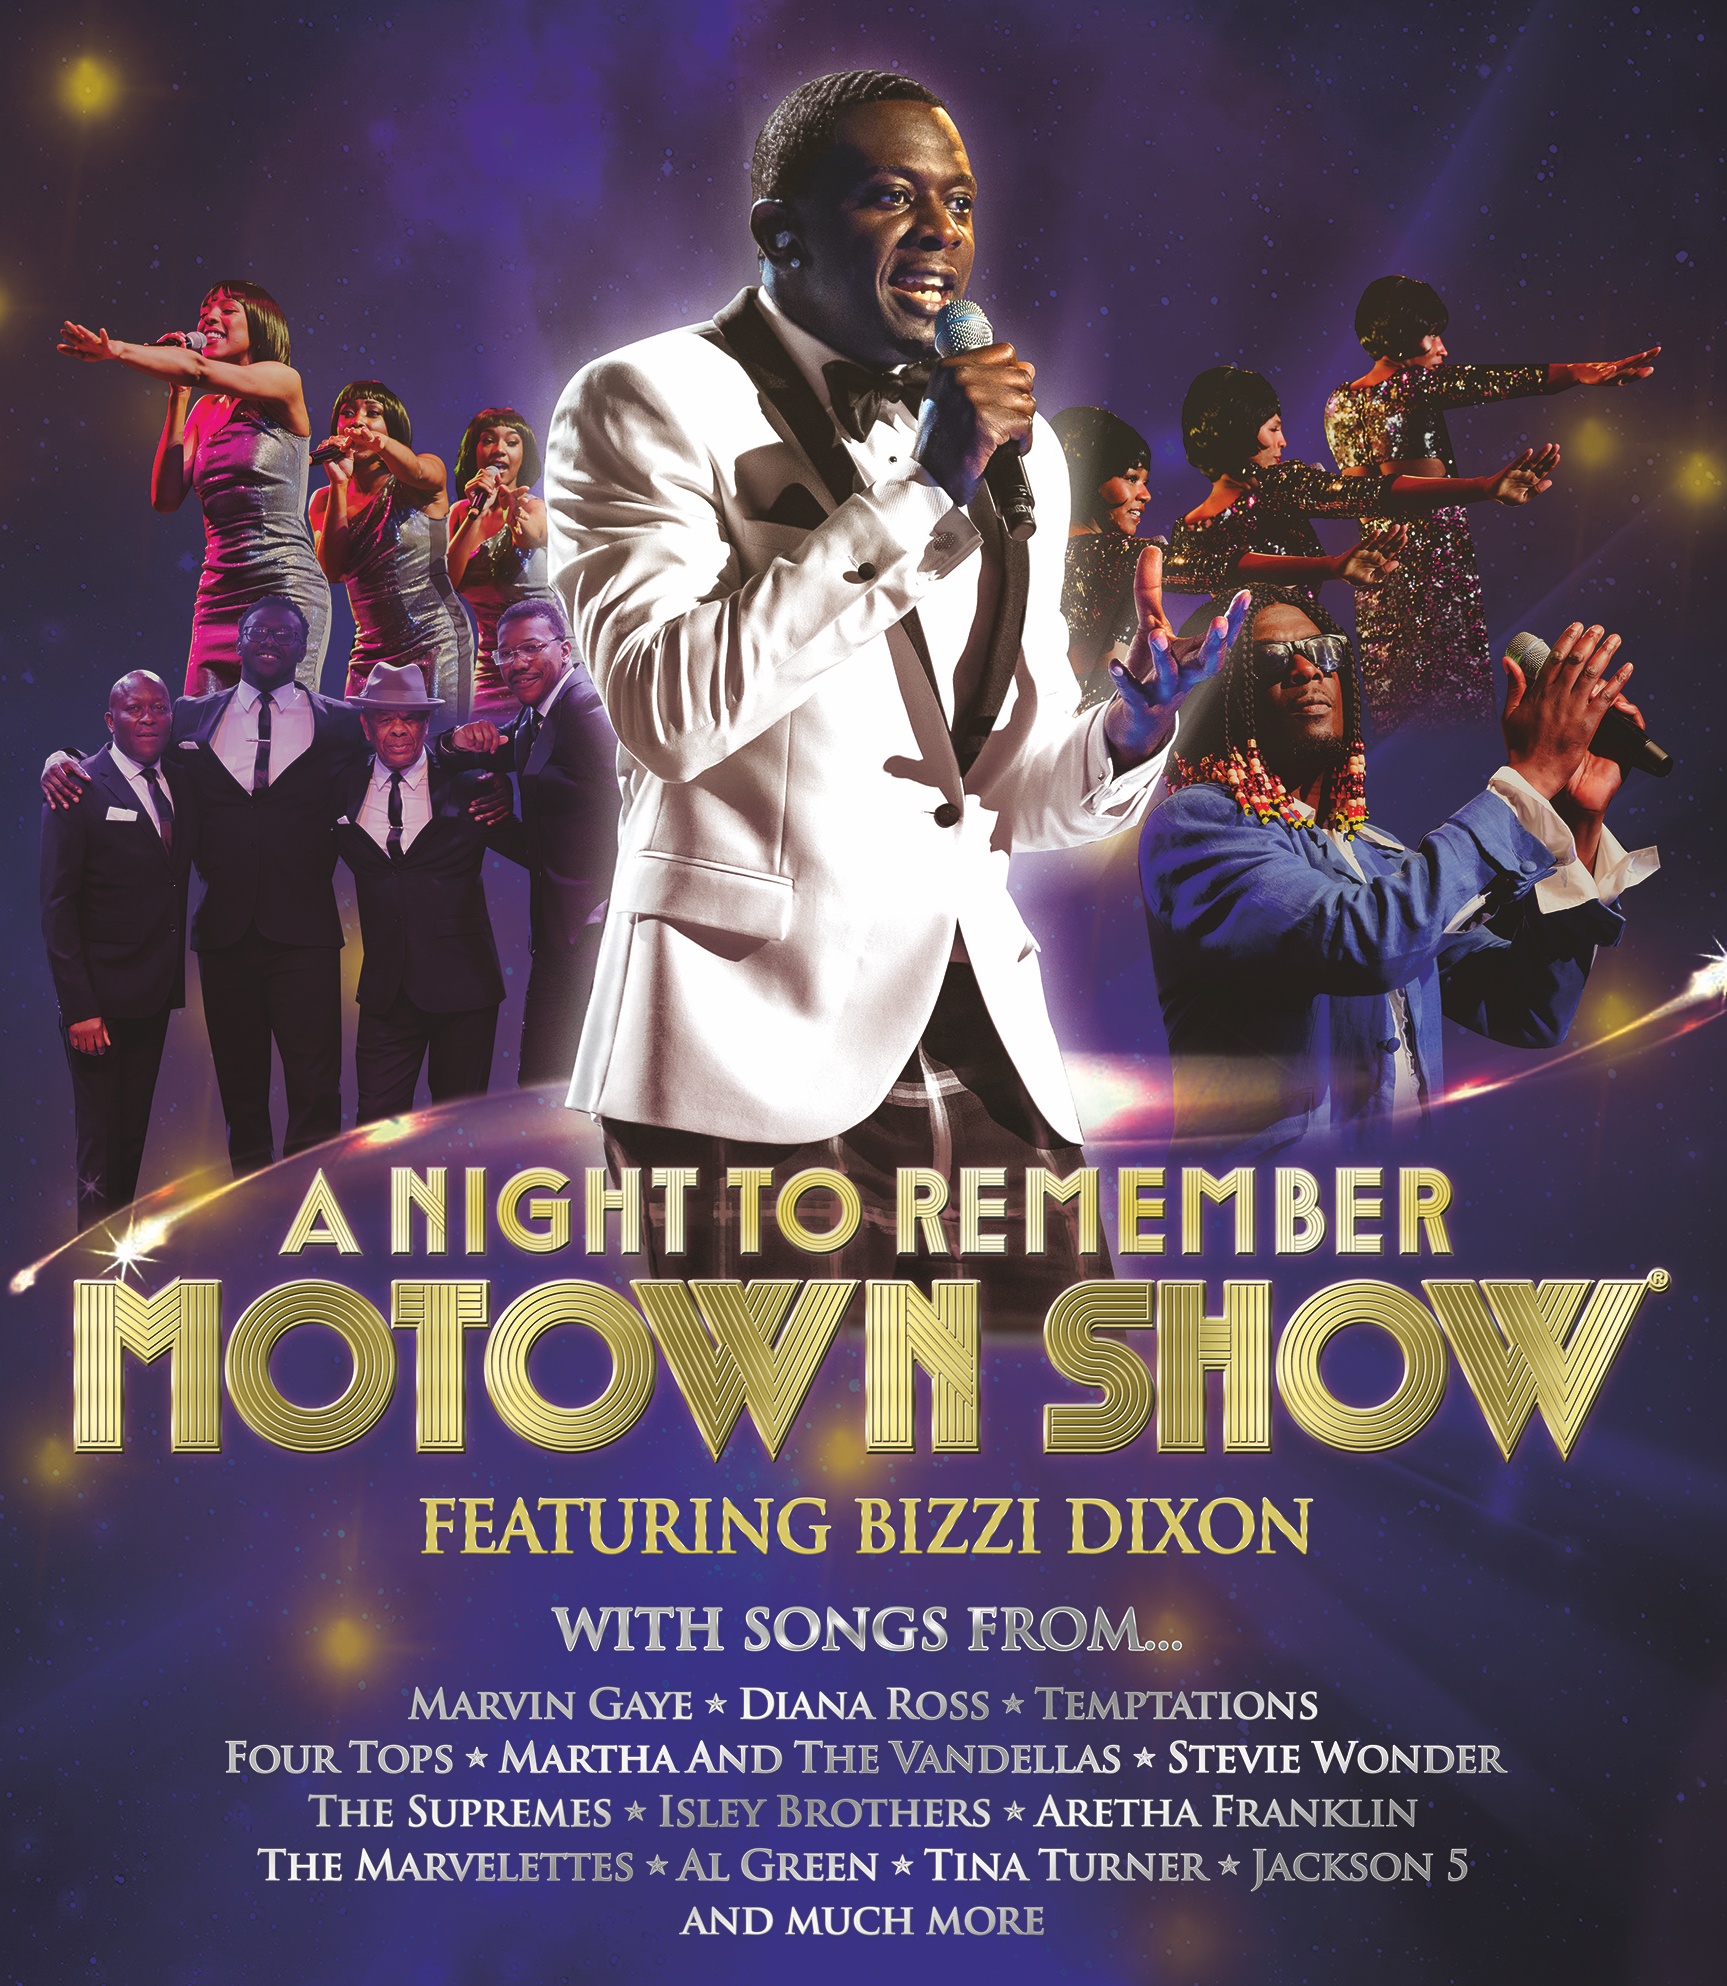 A Night To Remember Motown Show web